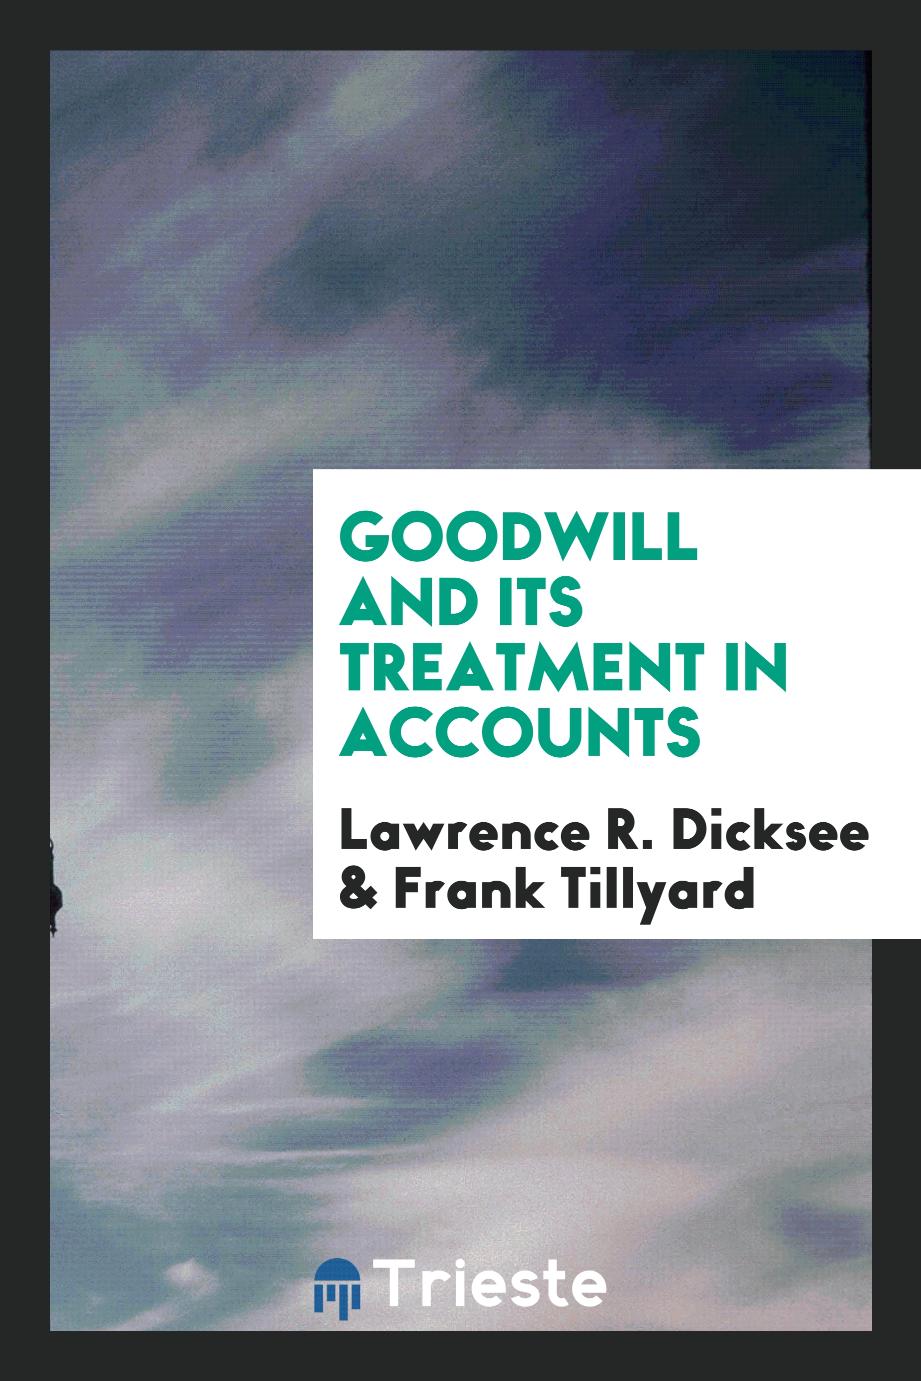 Goodwill and its treatment in accounts